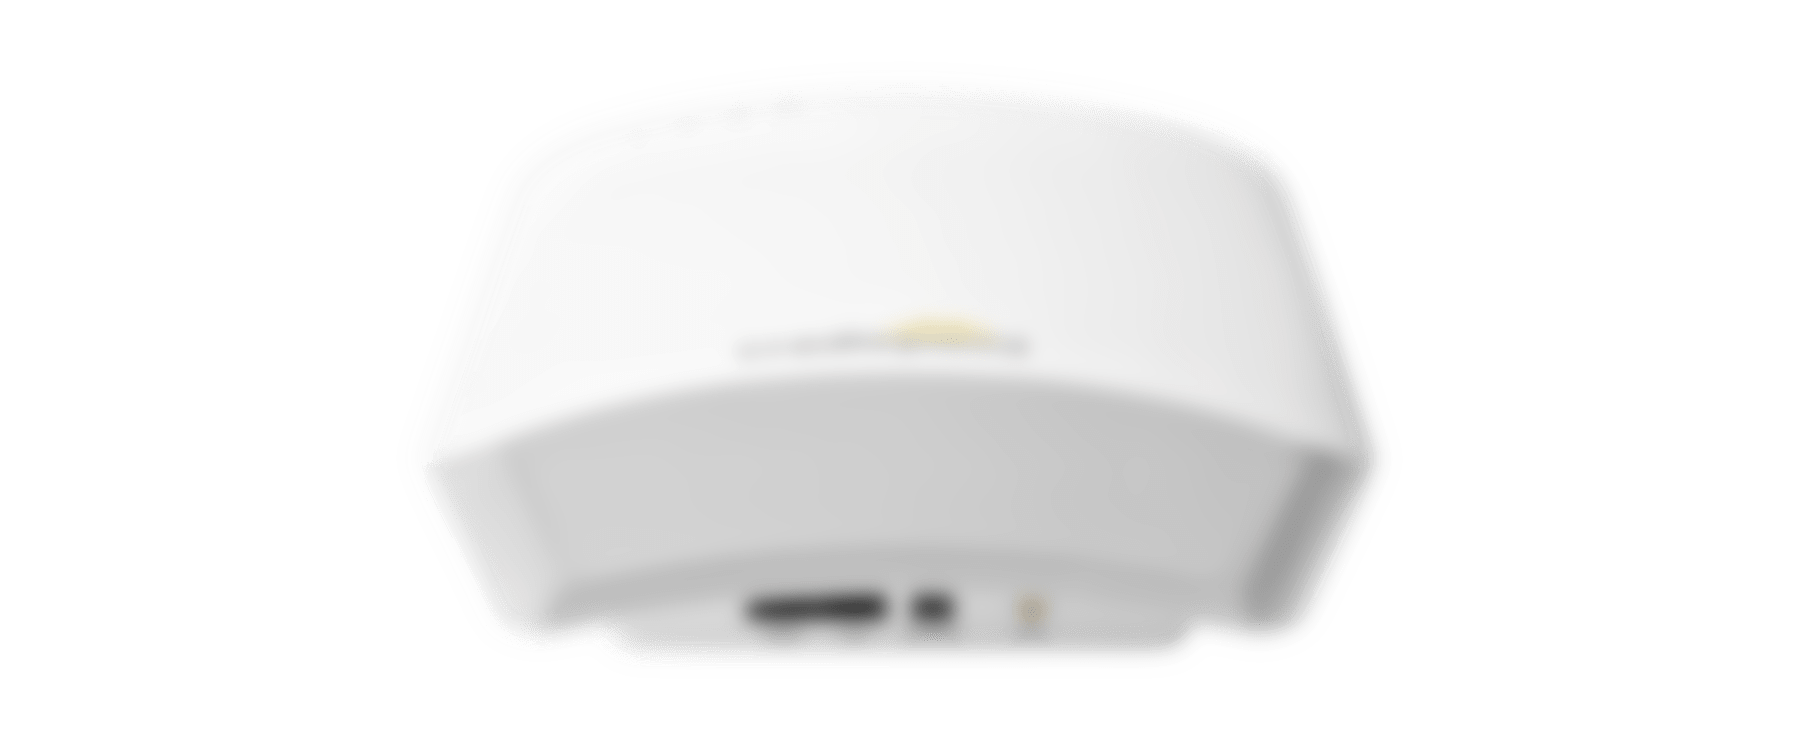 A2400 Series Cellular Access Point